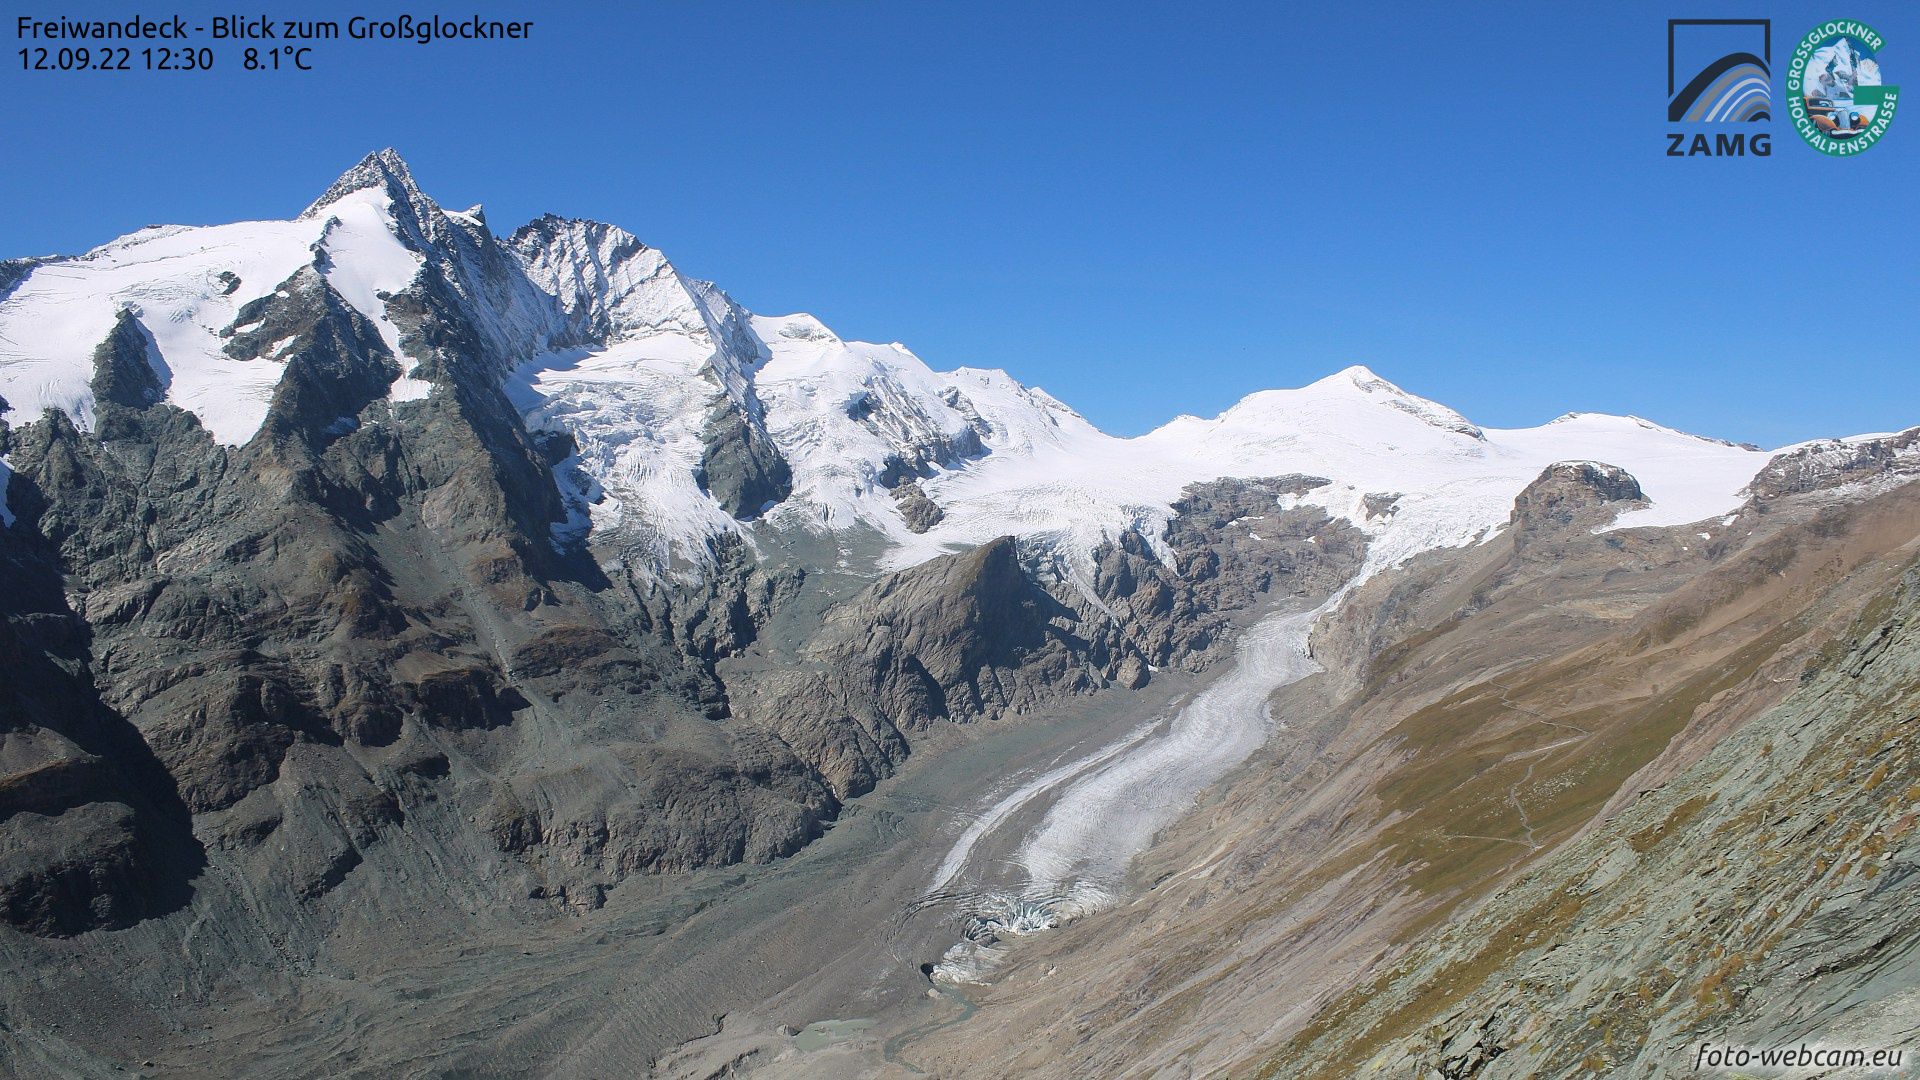 The highest peaks of the Alps are white again! (foto-webcam.eu)